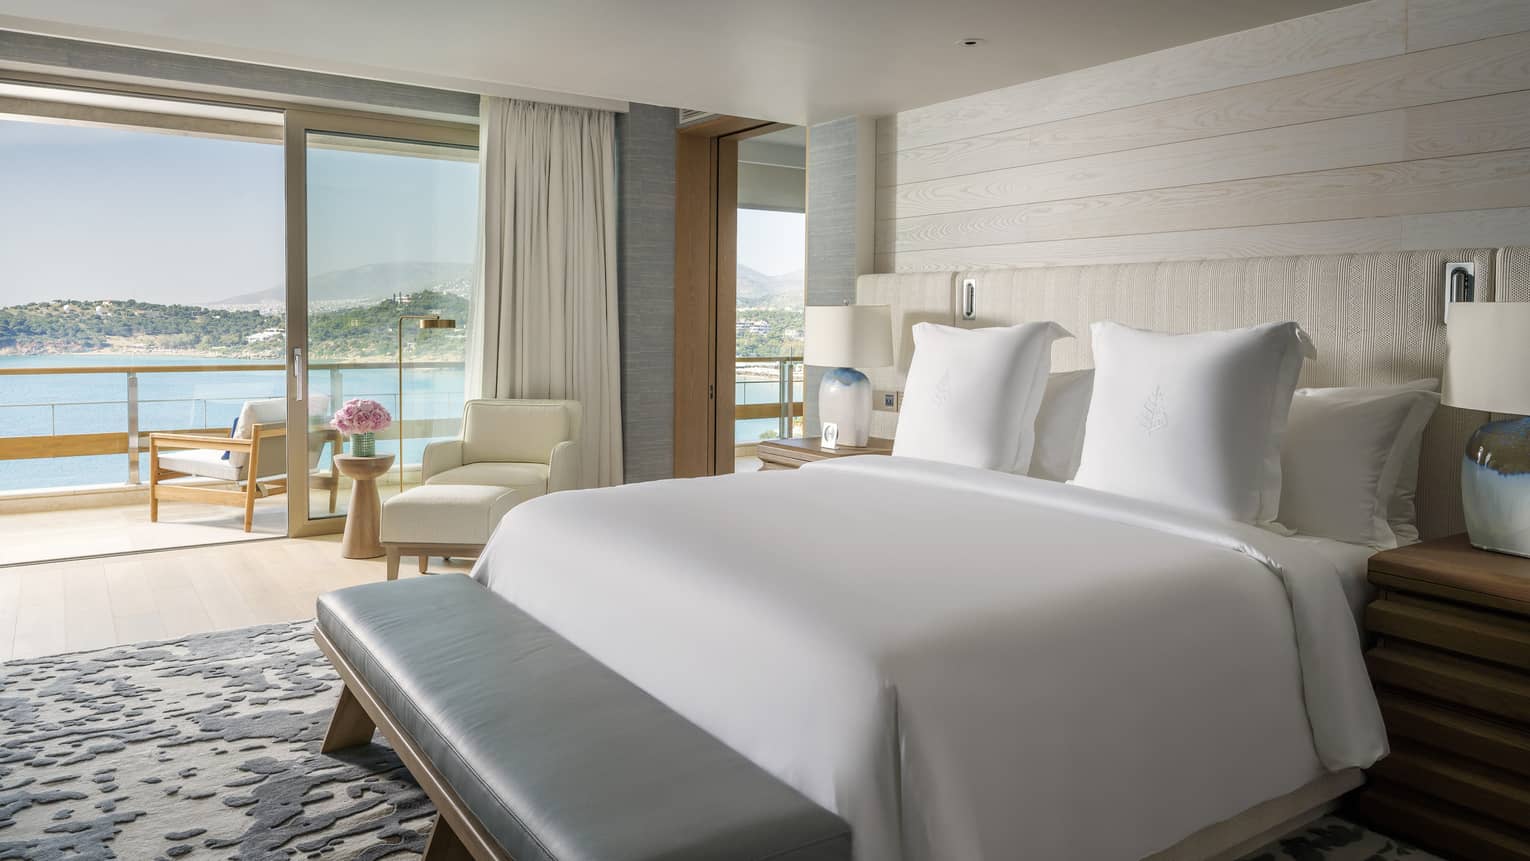 Arion Sea View Suite with white bedding, balcony with chairs overlooking ocean